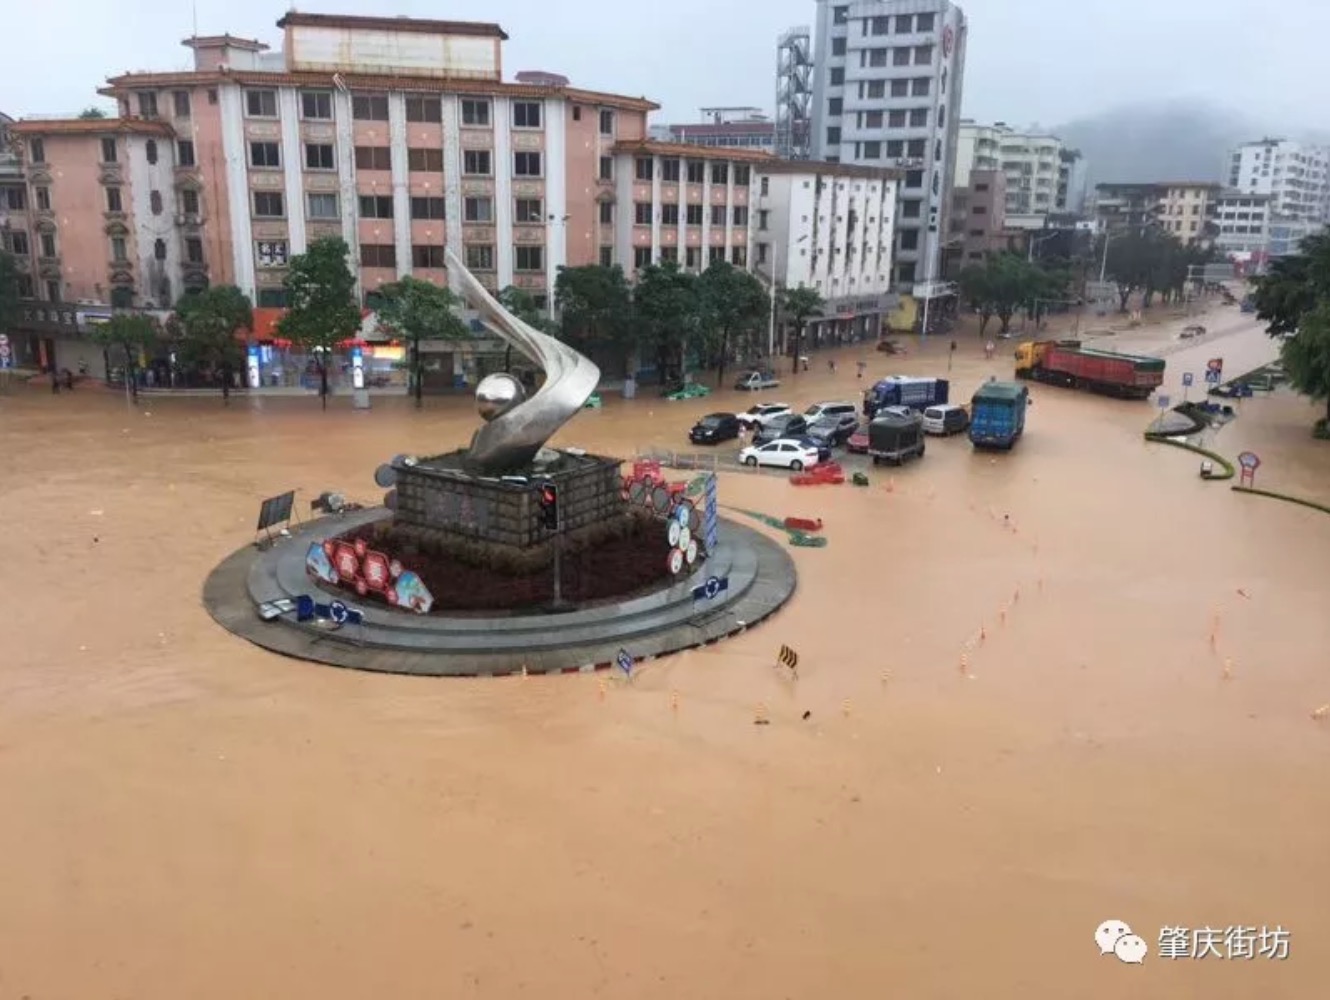 Deadly Landslide, Floods as Tropical Storm Slams South China – That’s Shenzhen1330 x 1000